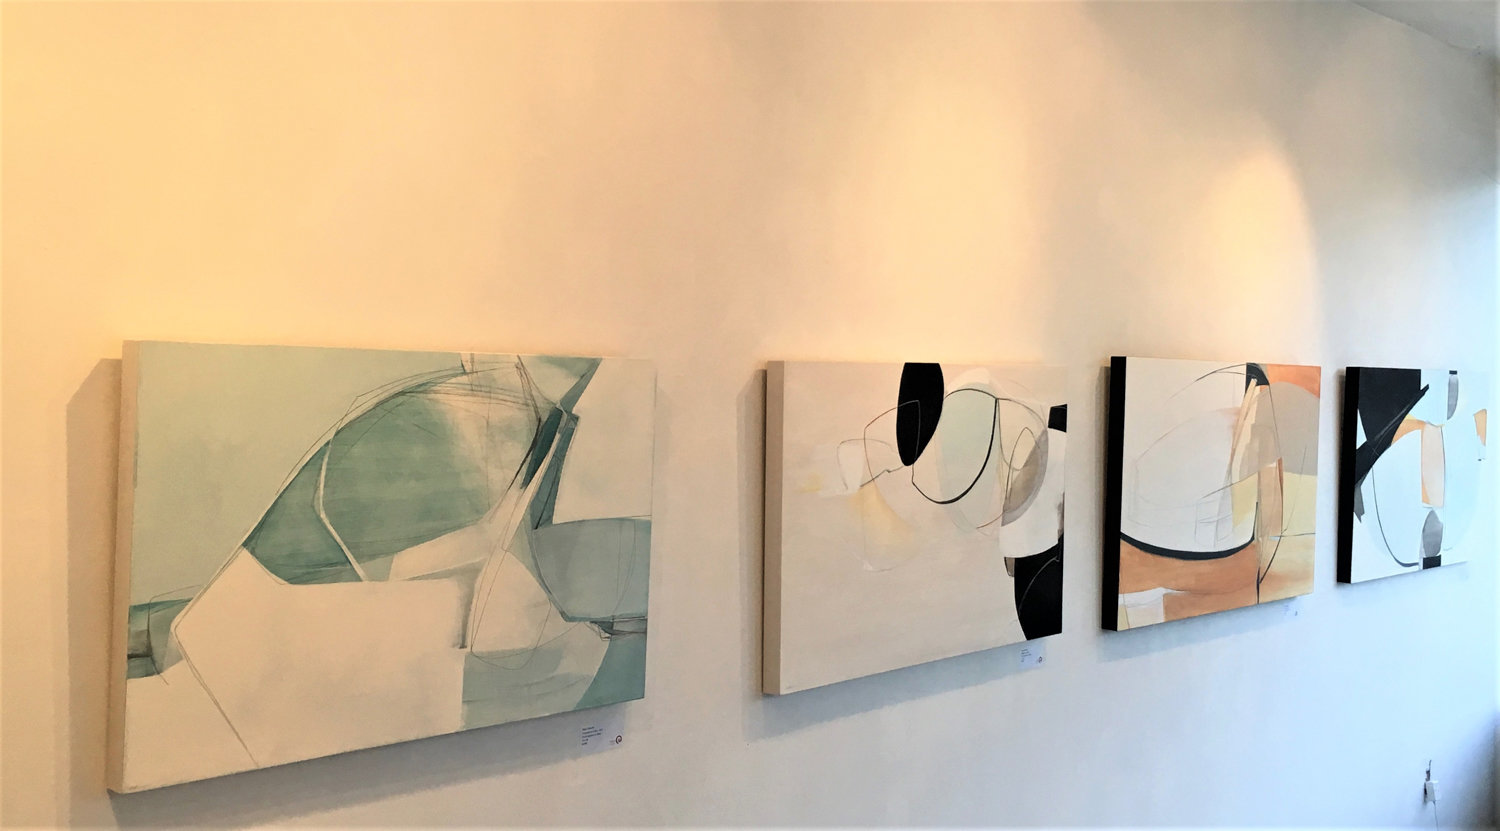 A selection of Rose Umerlik’s paintings based on her interpersonal relationships is included in the group exhibition ‘Female Abstractionists,’ on display through May 6 at Elisa Contemporary Art.